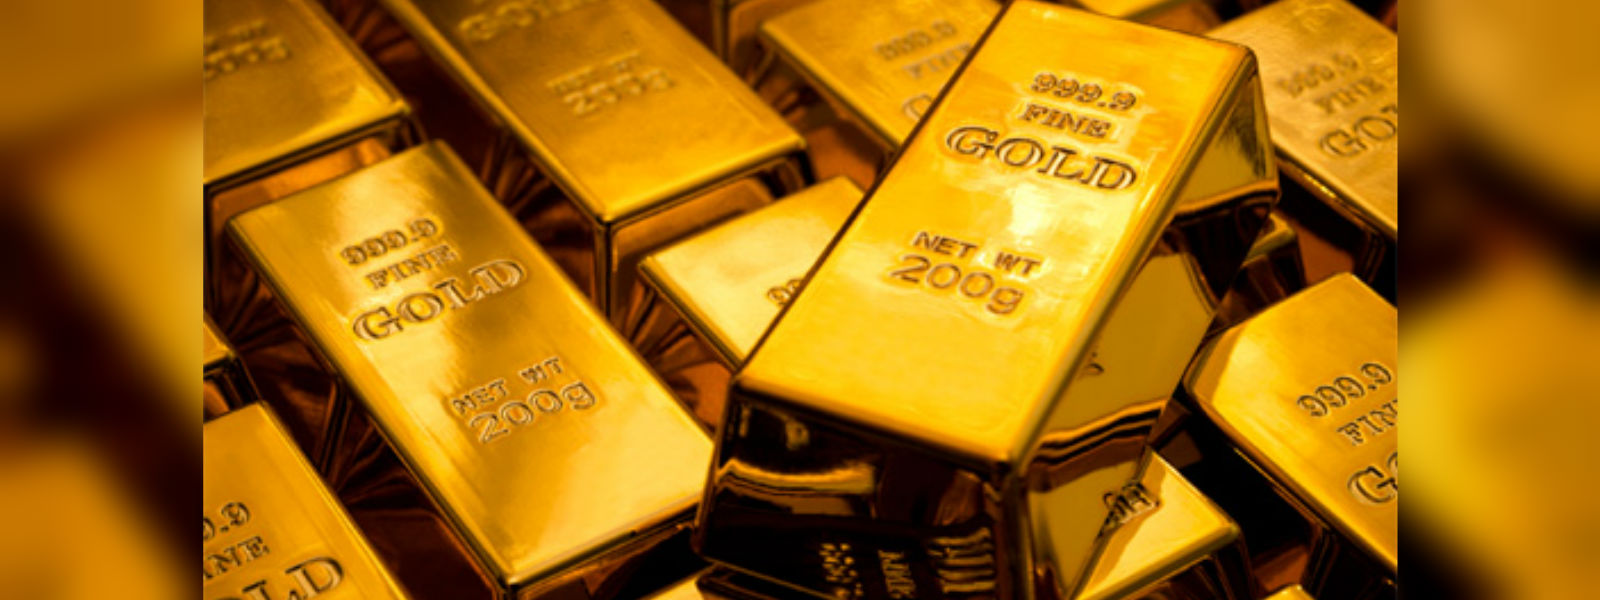 Sri Lanka reports a record hike in Gold prices